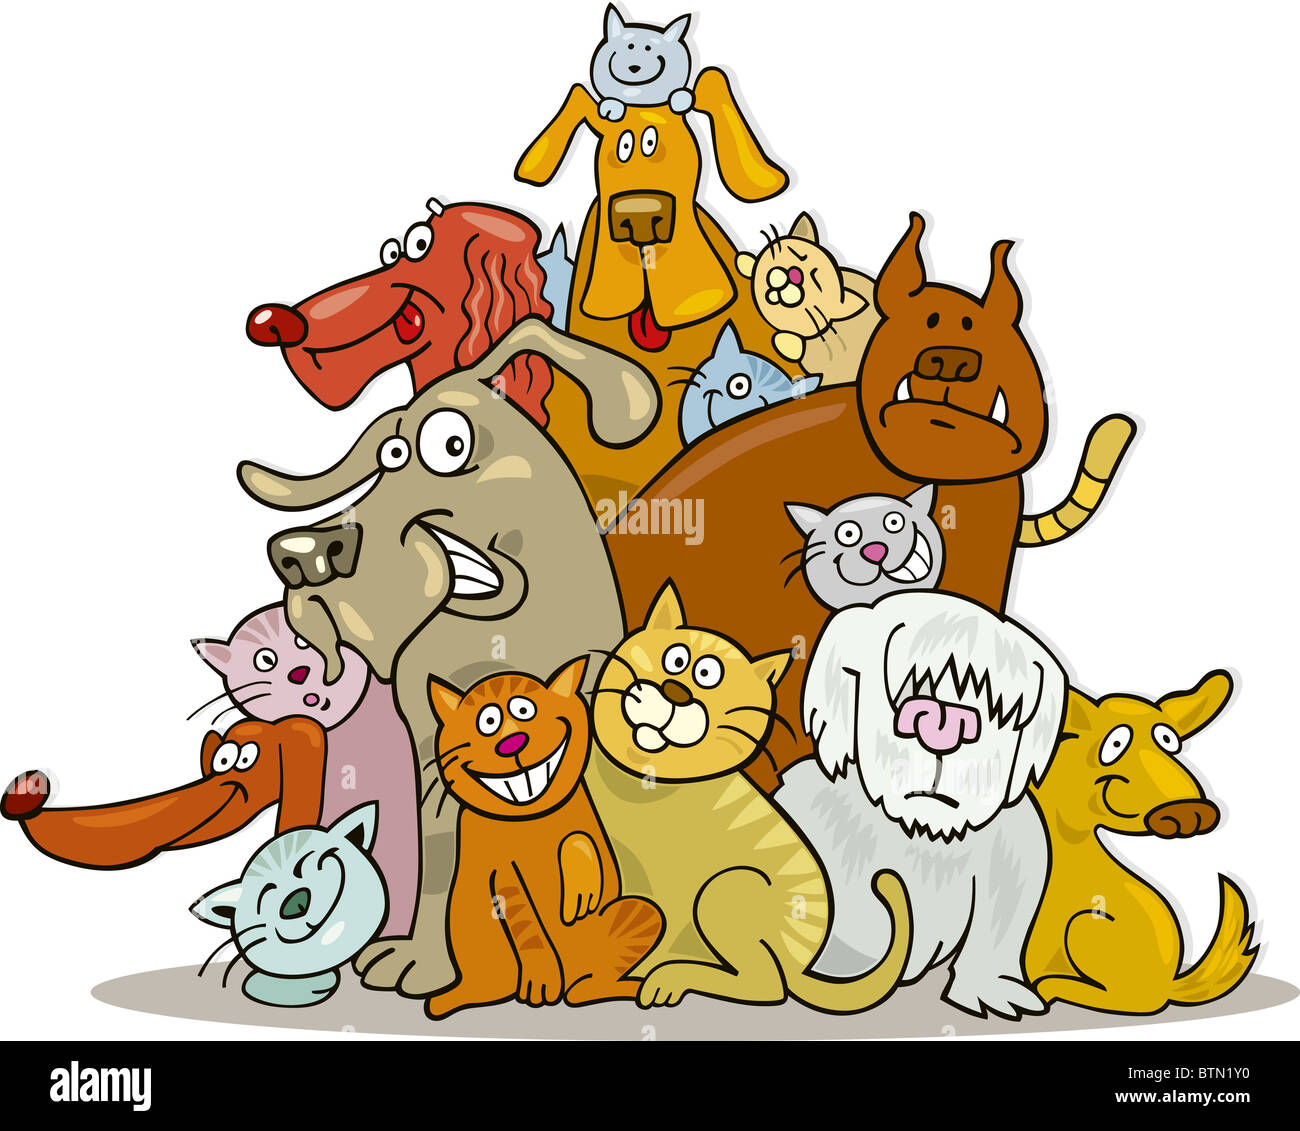 Illustration of Cats and Dogs group in friendship Stock Photo